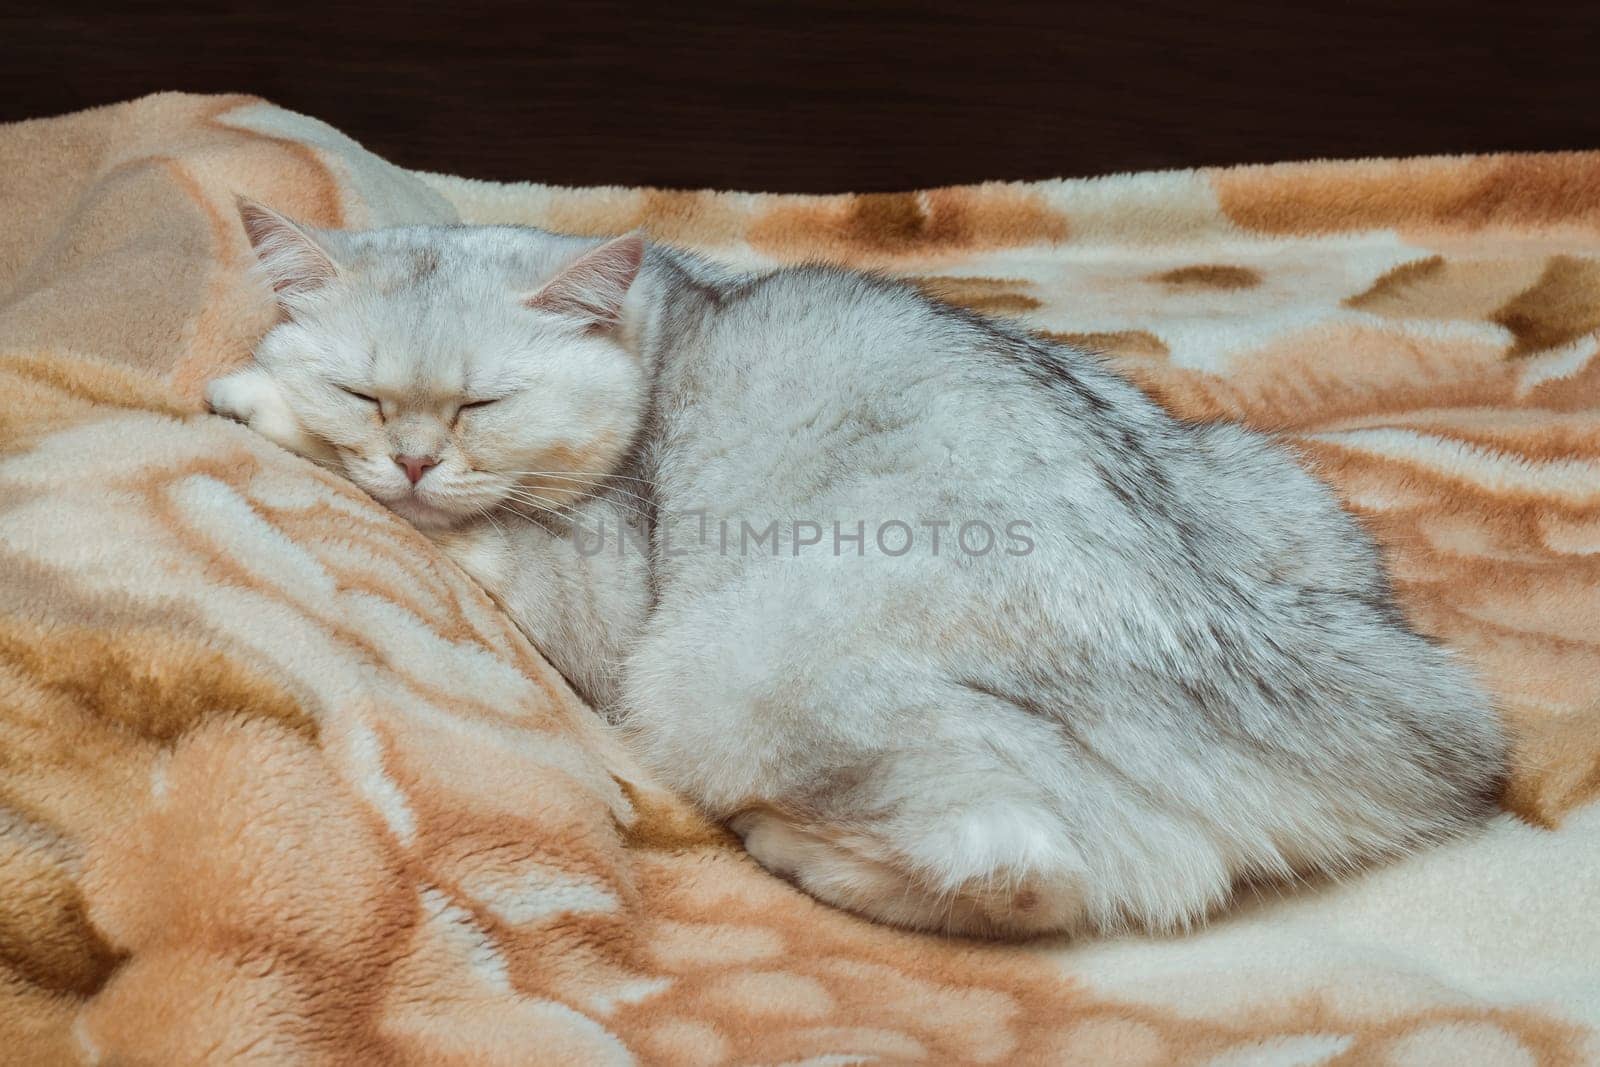 A silvery British cat sleeps sweetly on the bed. Pets at home by ElenaNEL